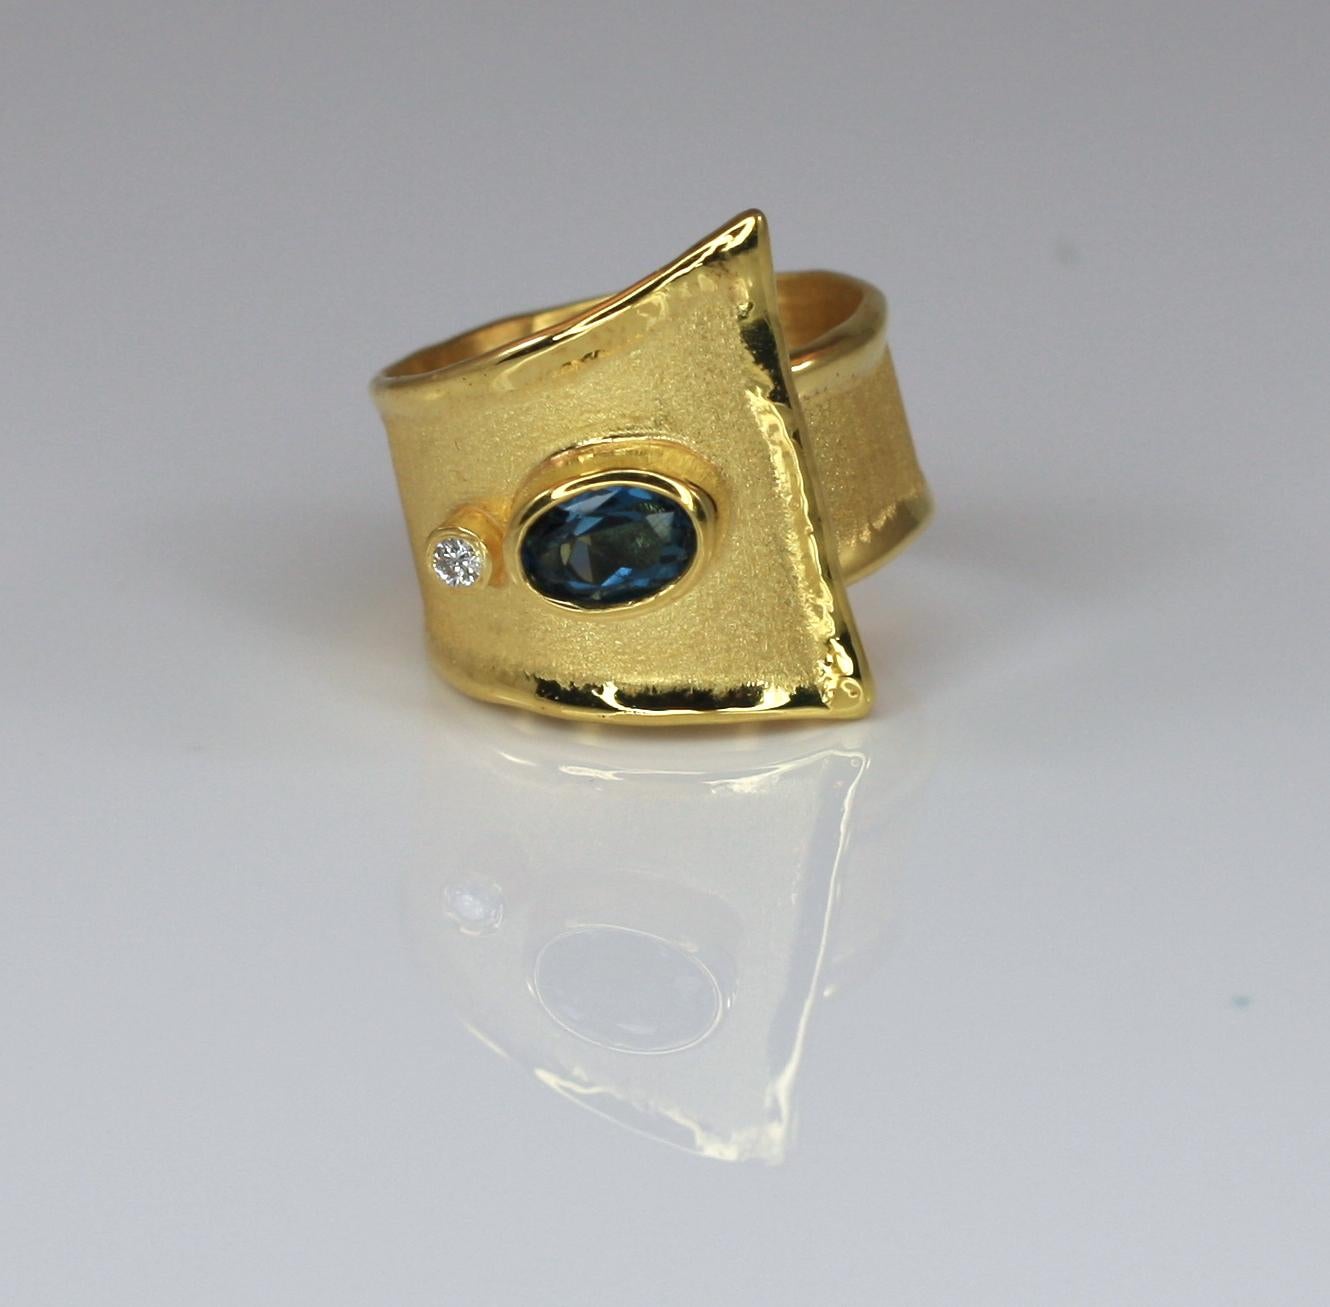 Yianni Creations artisan ring crafted in Greece from 18 Karat Yellow Gold. Shiny liquid edges contrast with the brushed texture of the surface. This geometrical ring features a 1.60 Carat oval cut London Blue Topaz accompanied by a 0.03 Carat